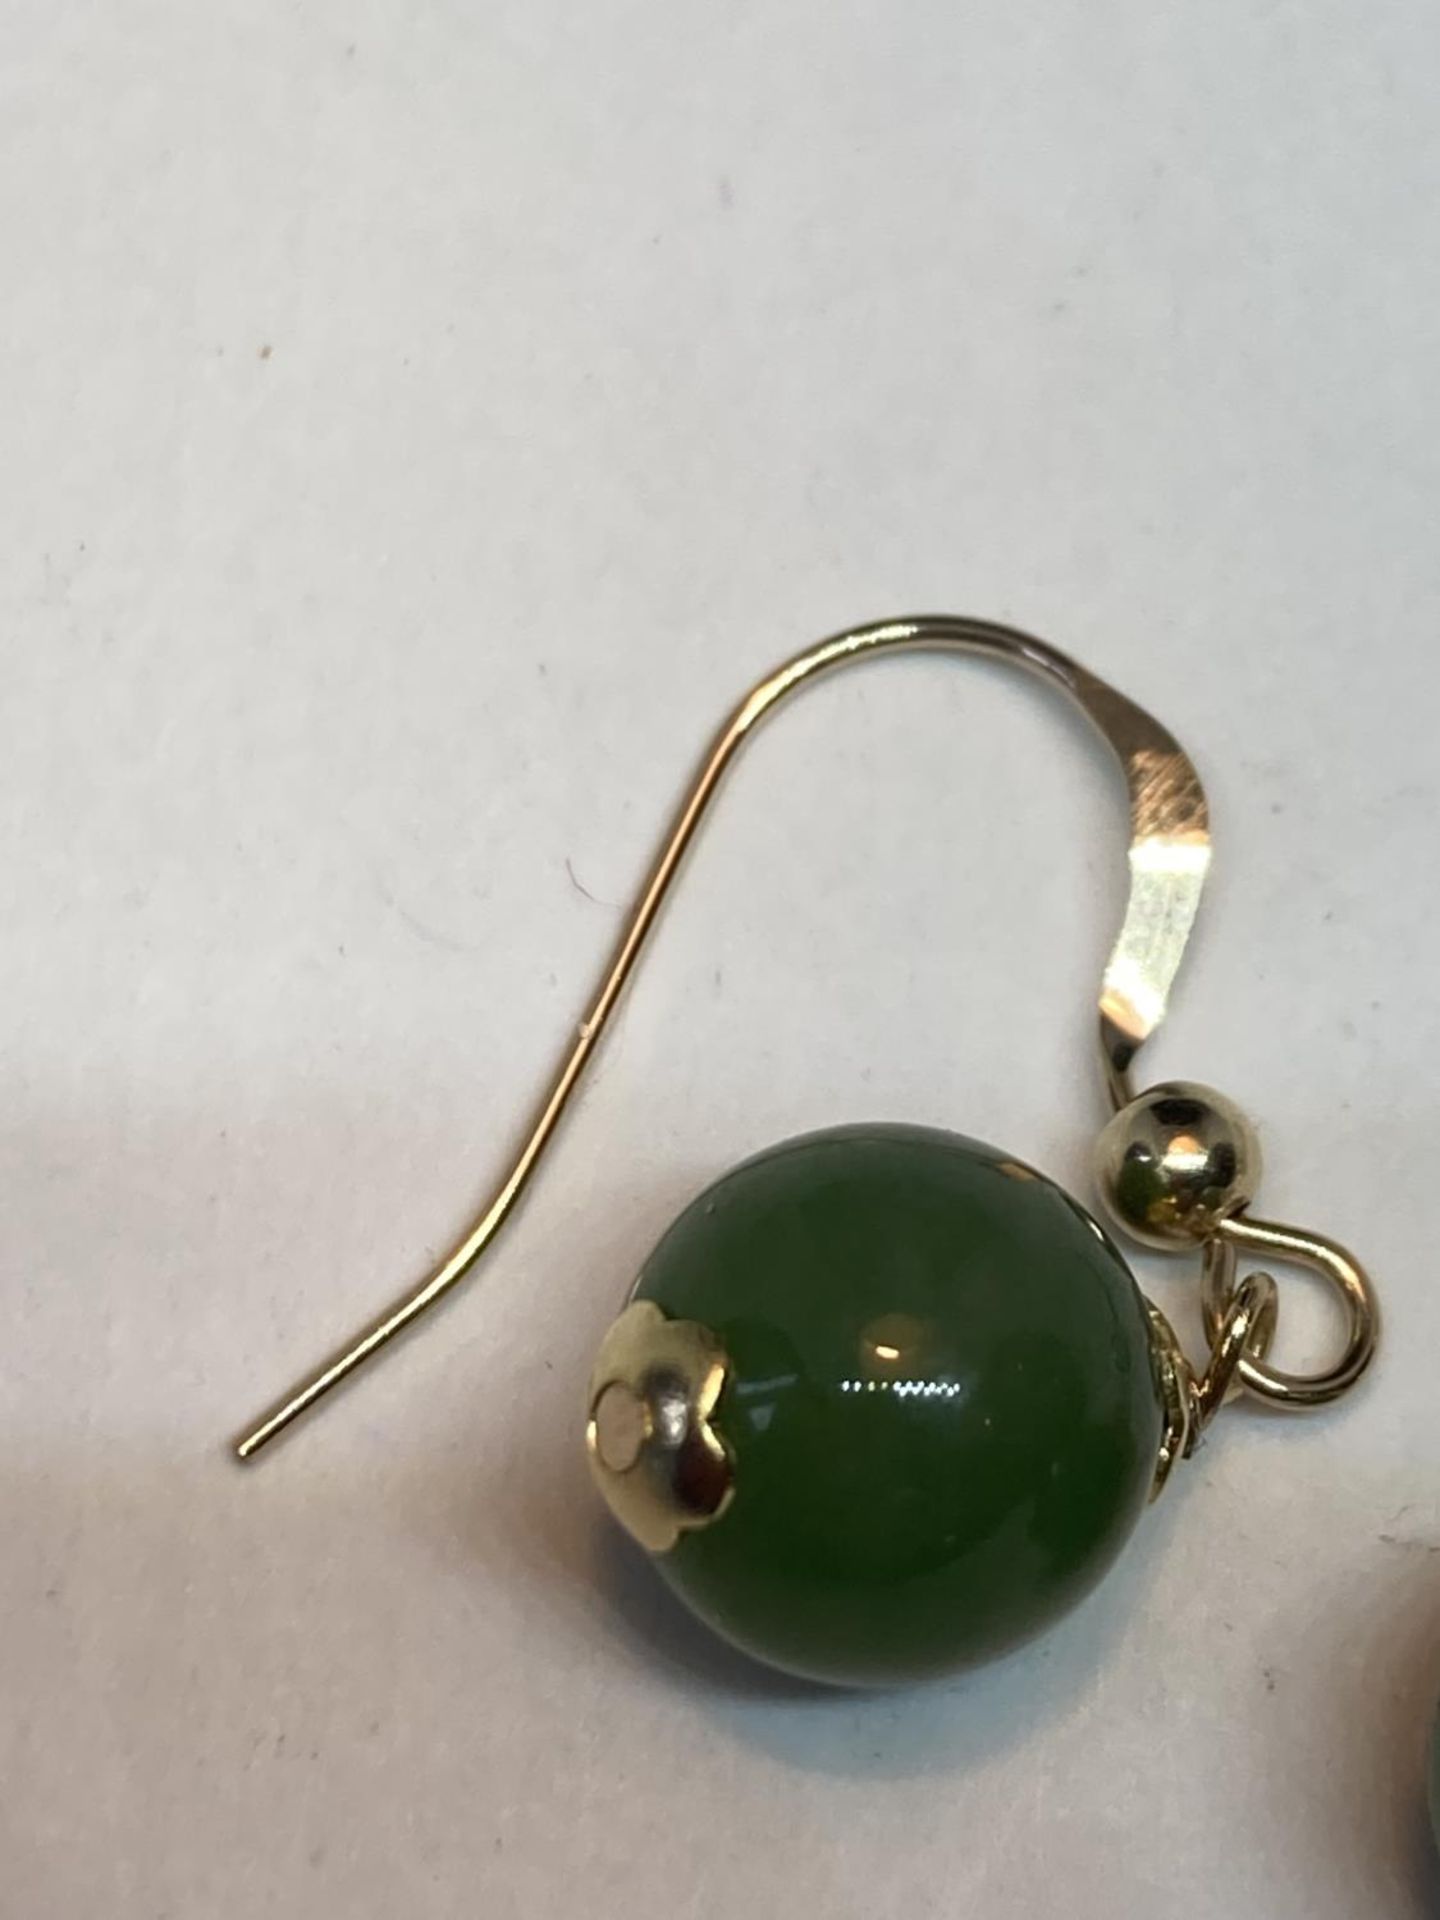 A PAIR OF MARKED 9K EARRINGS WITH GREEN CHALCEDONY STONES - Image 3 of 8